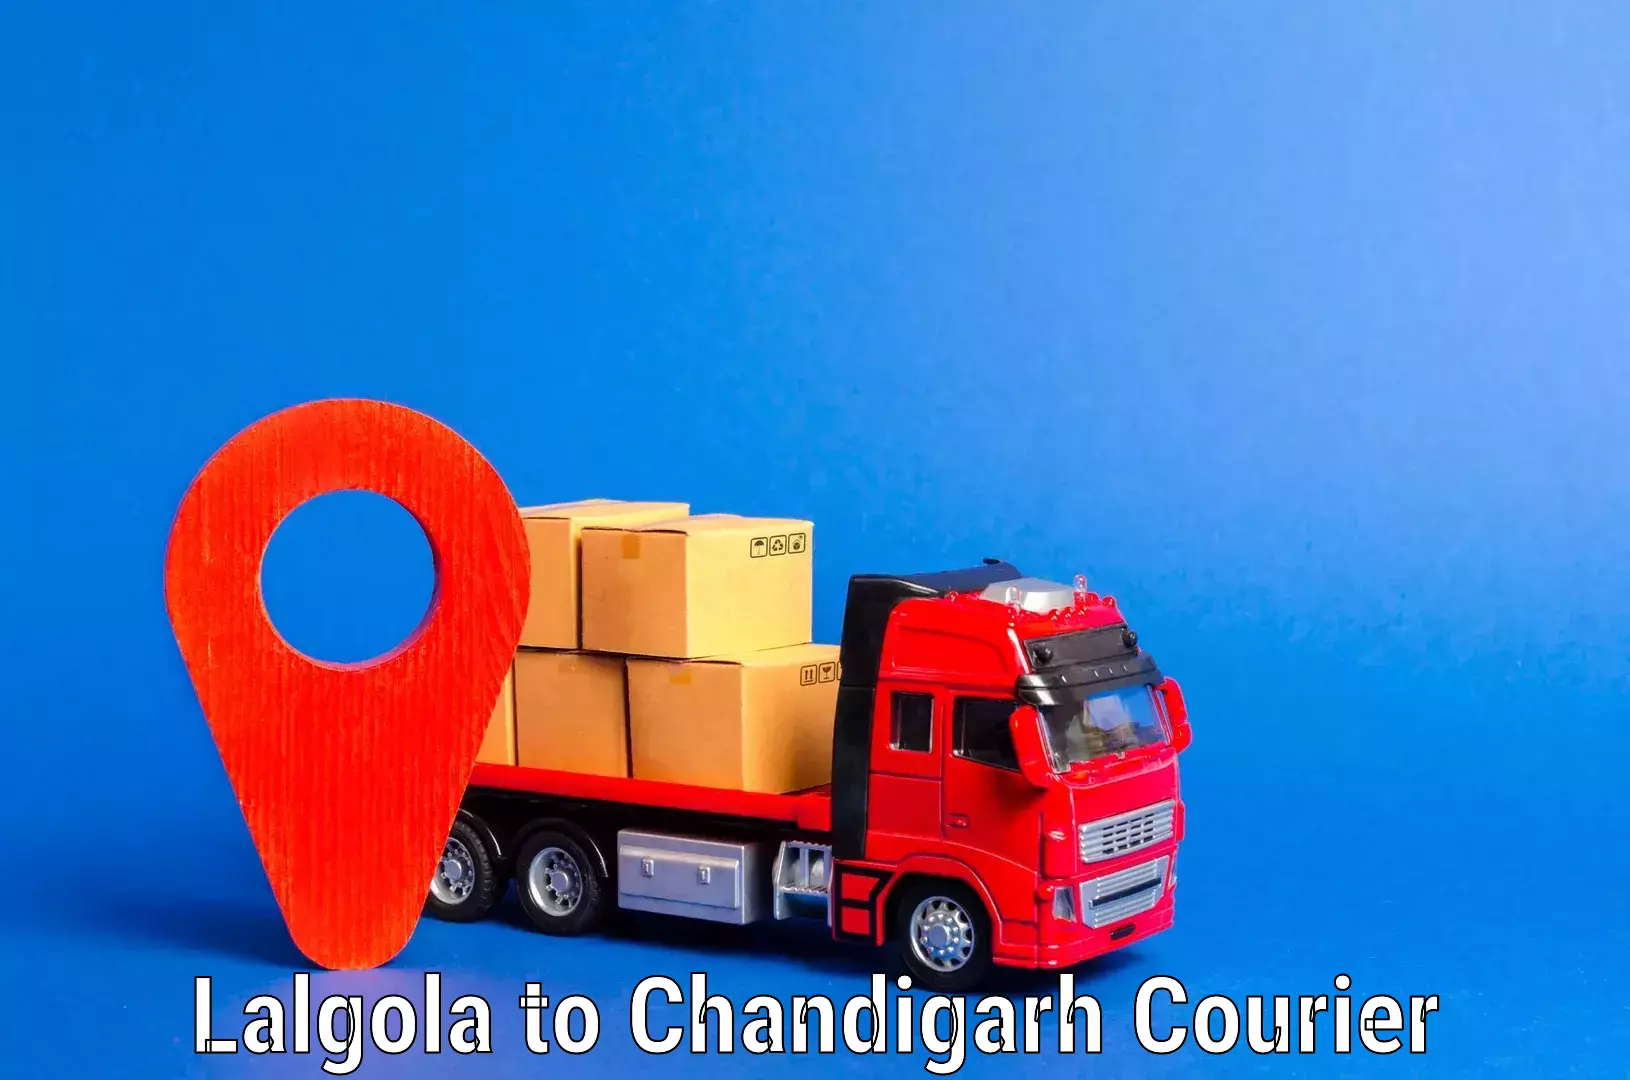 Furniture transport solutions Lalgola to Chandigarh